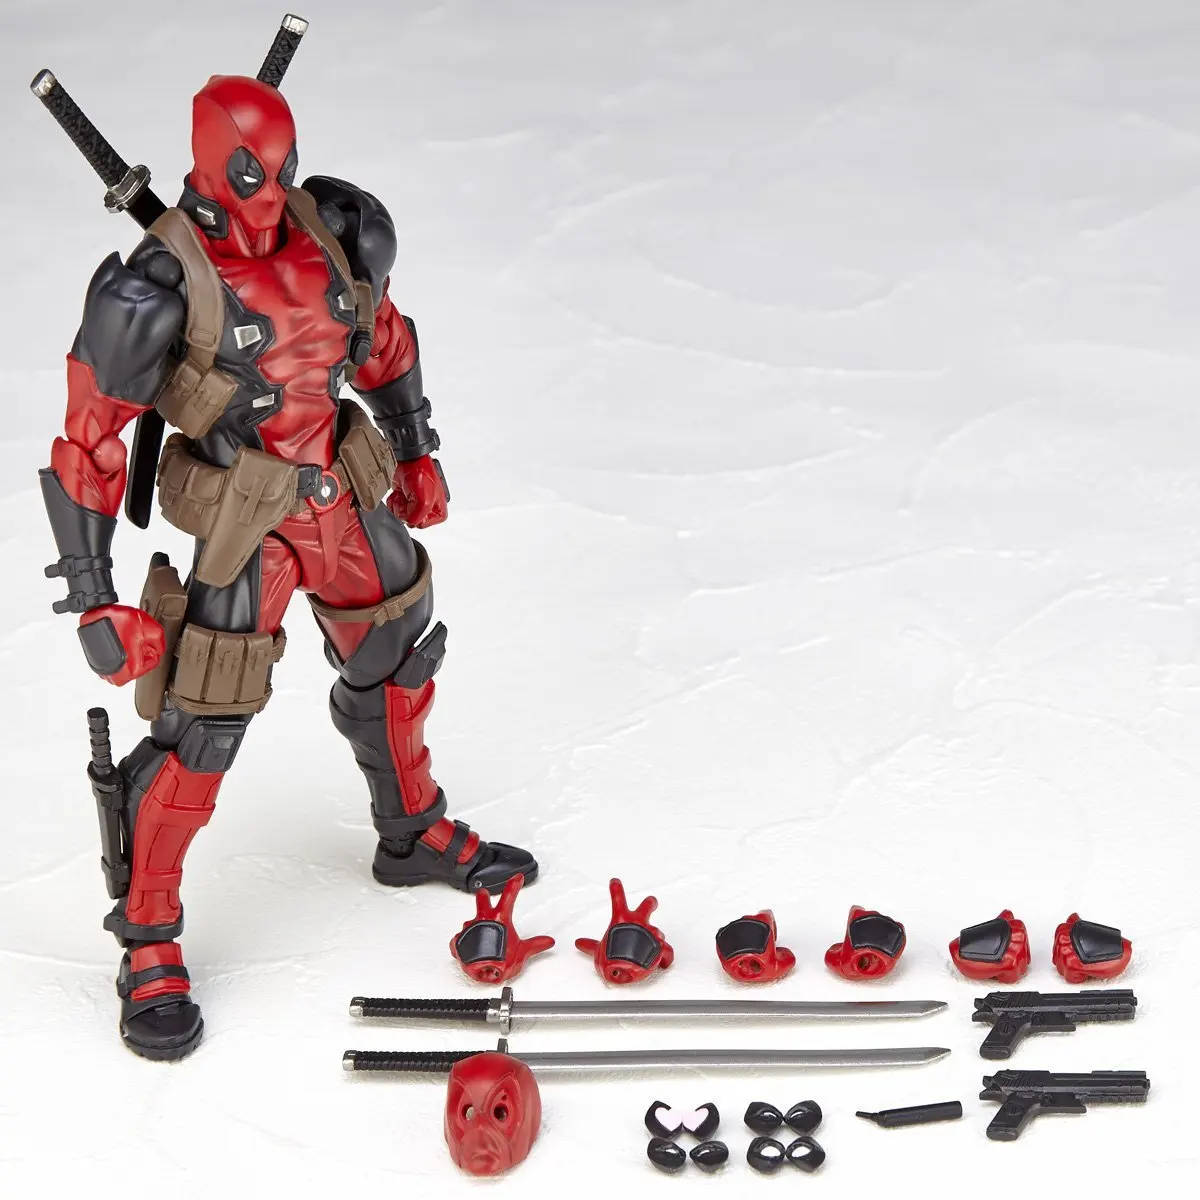 

16CM Super Hero Amazing Yamaguchi Deadpool Action Figure Toys Dead Pool Movable Statues Model Doll Collectible Ornaments Toy